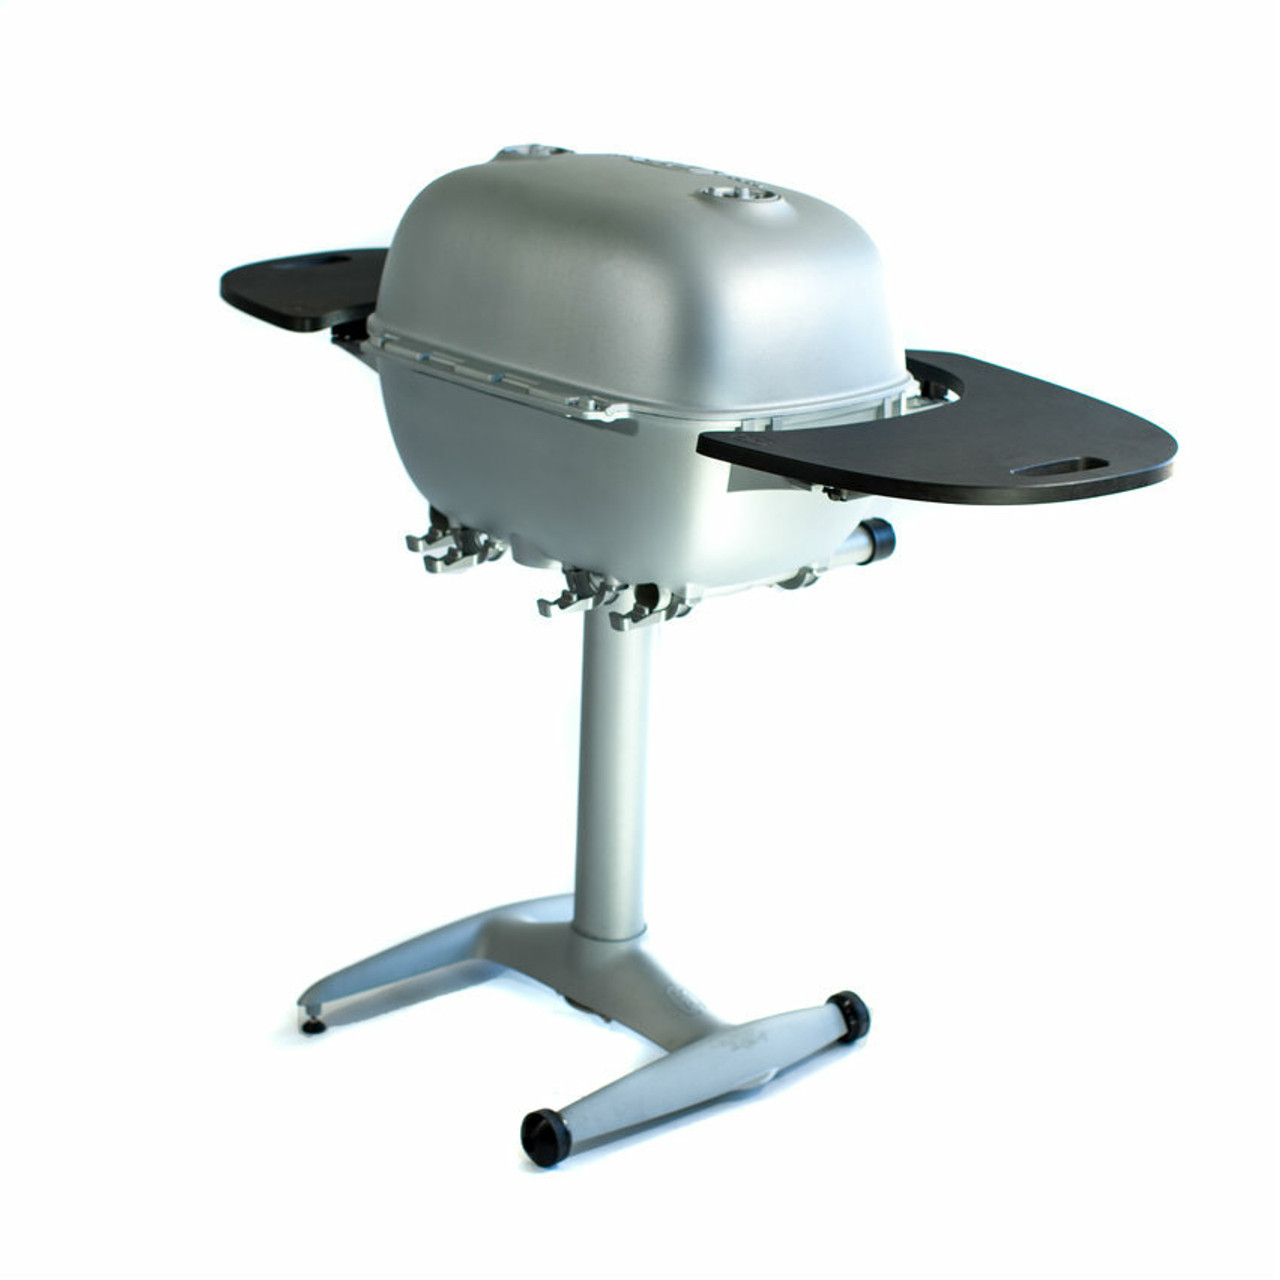 The New Pk360 Grill Smoker Pk Grills